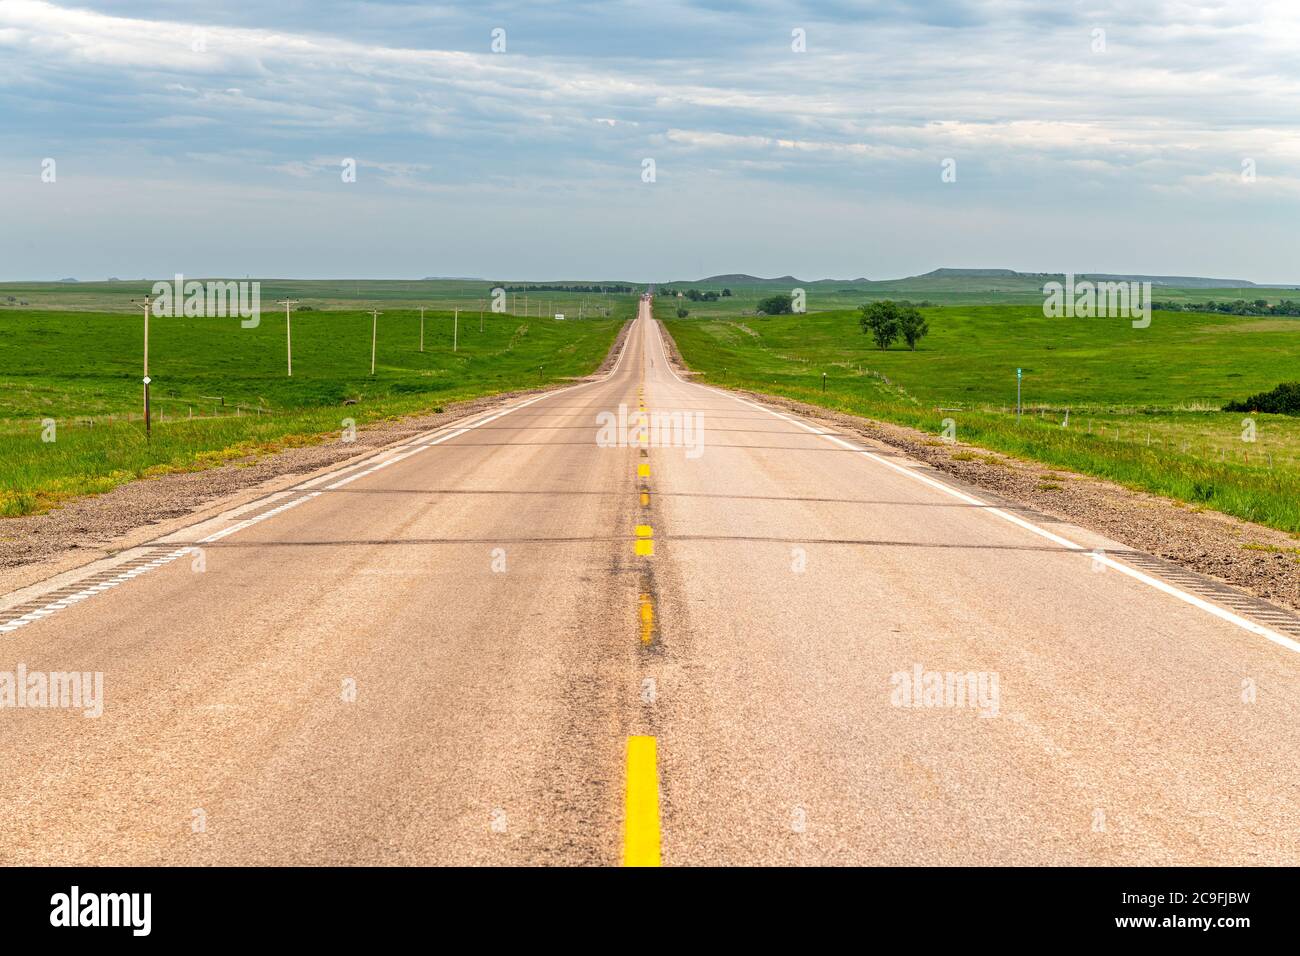 Diminishing perspective of a rural road in the Great Plains surrounded by green farmland and vast lands. Stock Photo